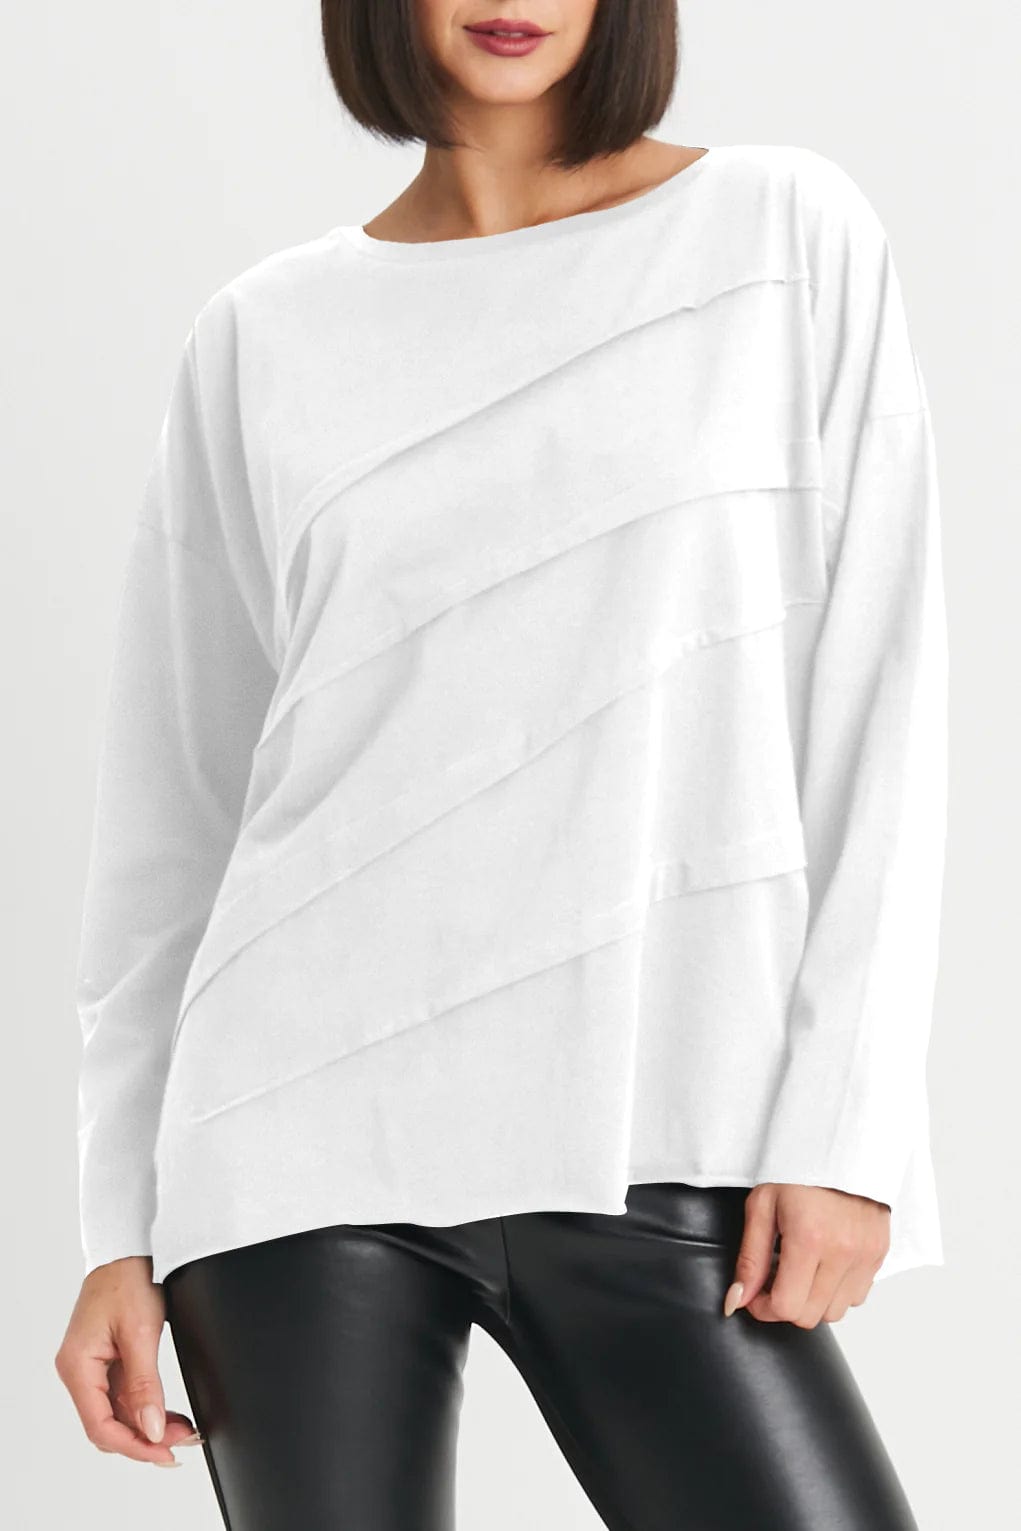 PLANET by Lauren G Women's Shirts & Tops White / One Size Planet Pima Cotton Tucked Boxy Tee